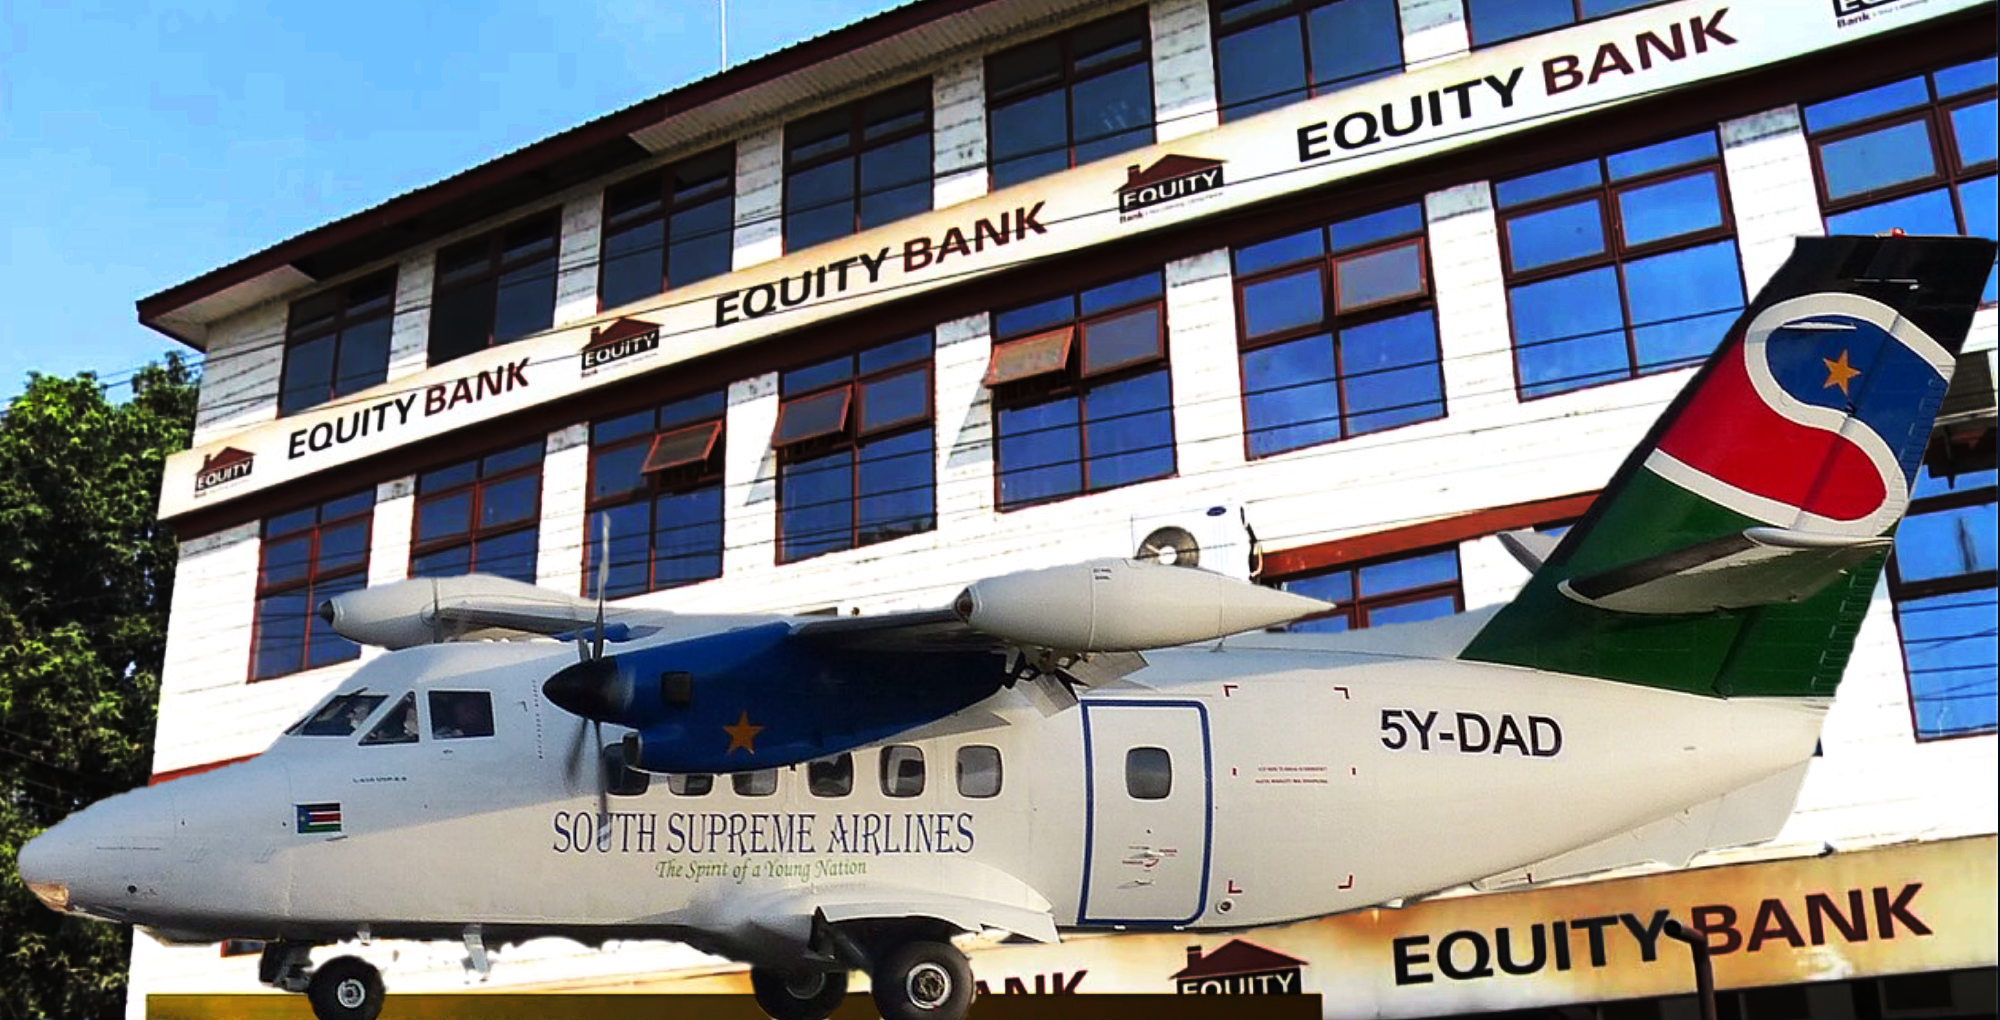 South Supreme Airlines, Equity bank, others illegally benefit from community oil shares